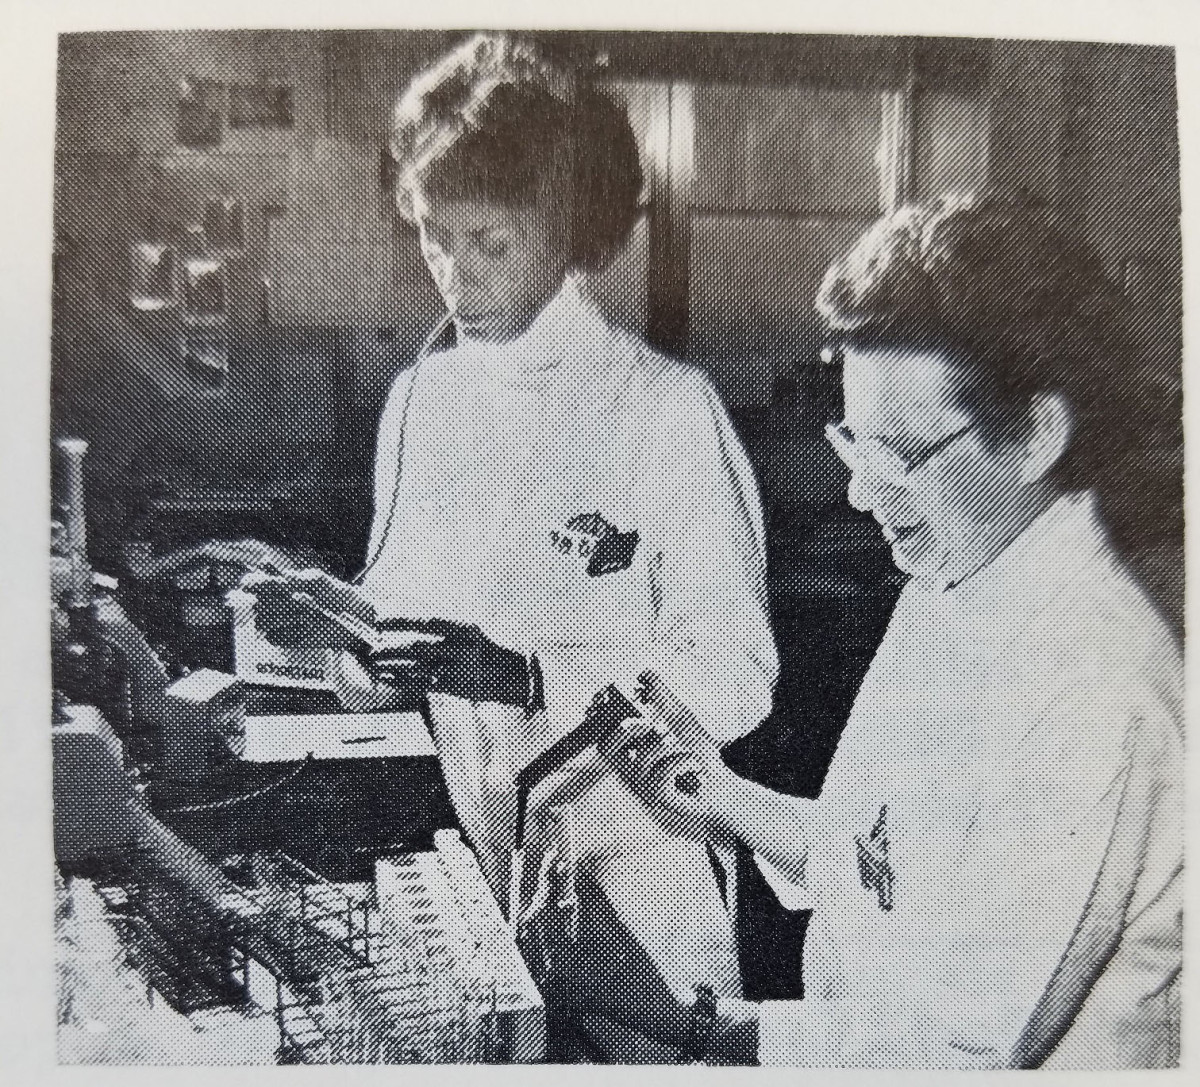 scientists Clara Hall (left) and Dr. Elizabeth Neufeld (right) working in the lab